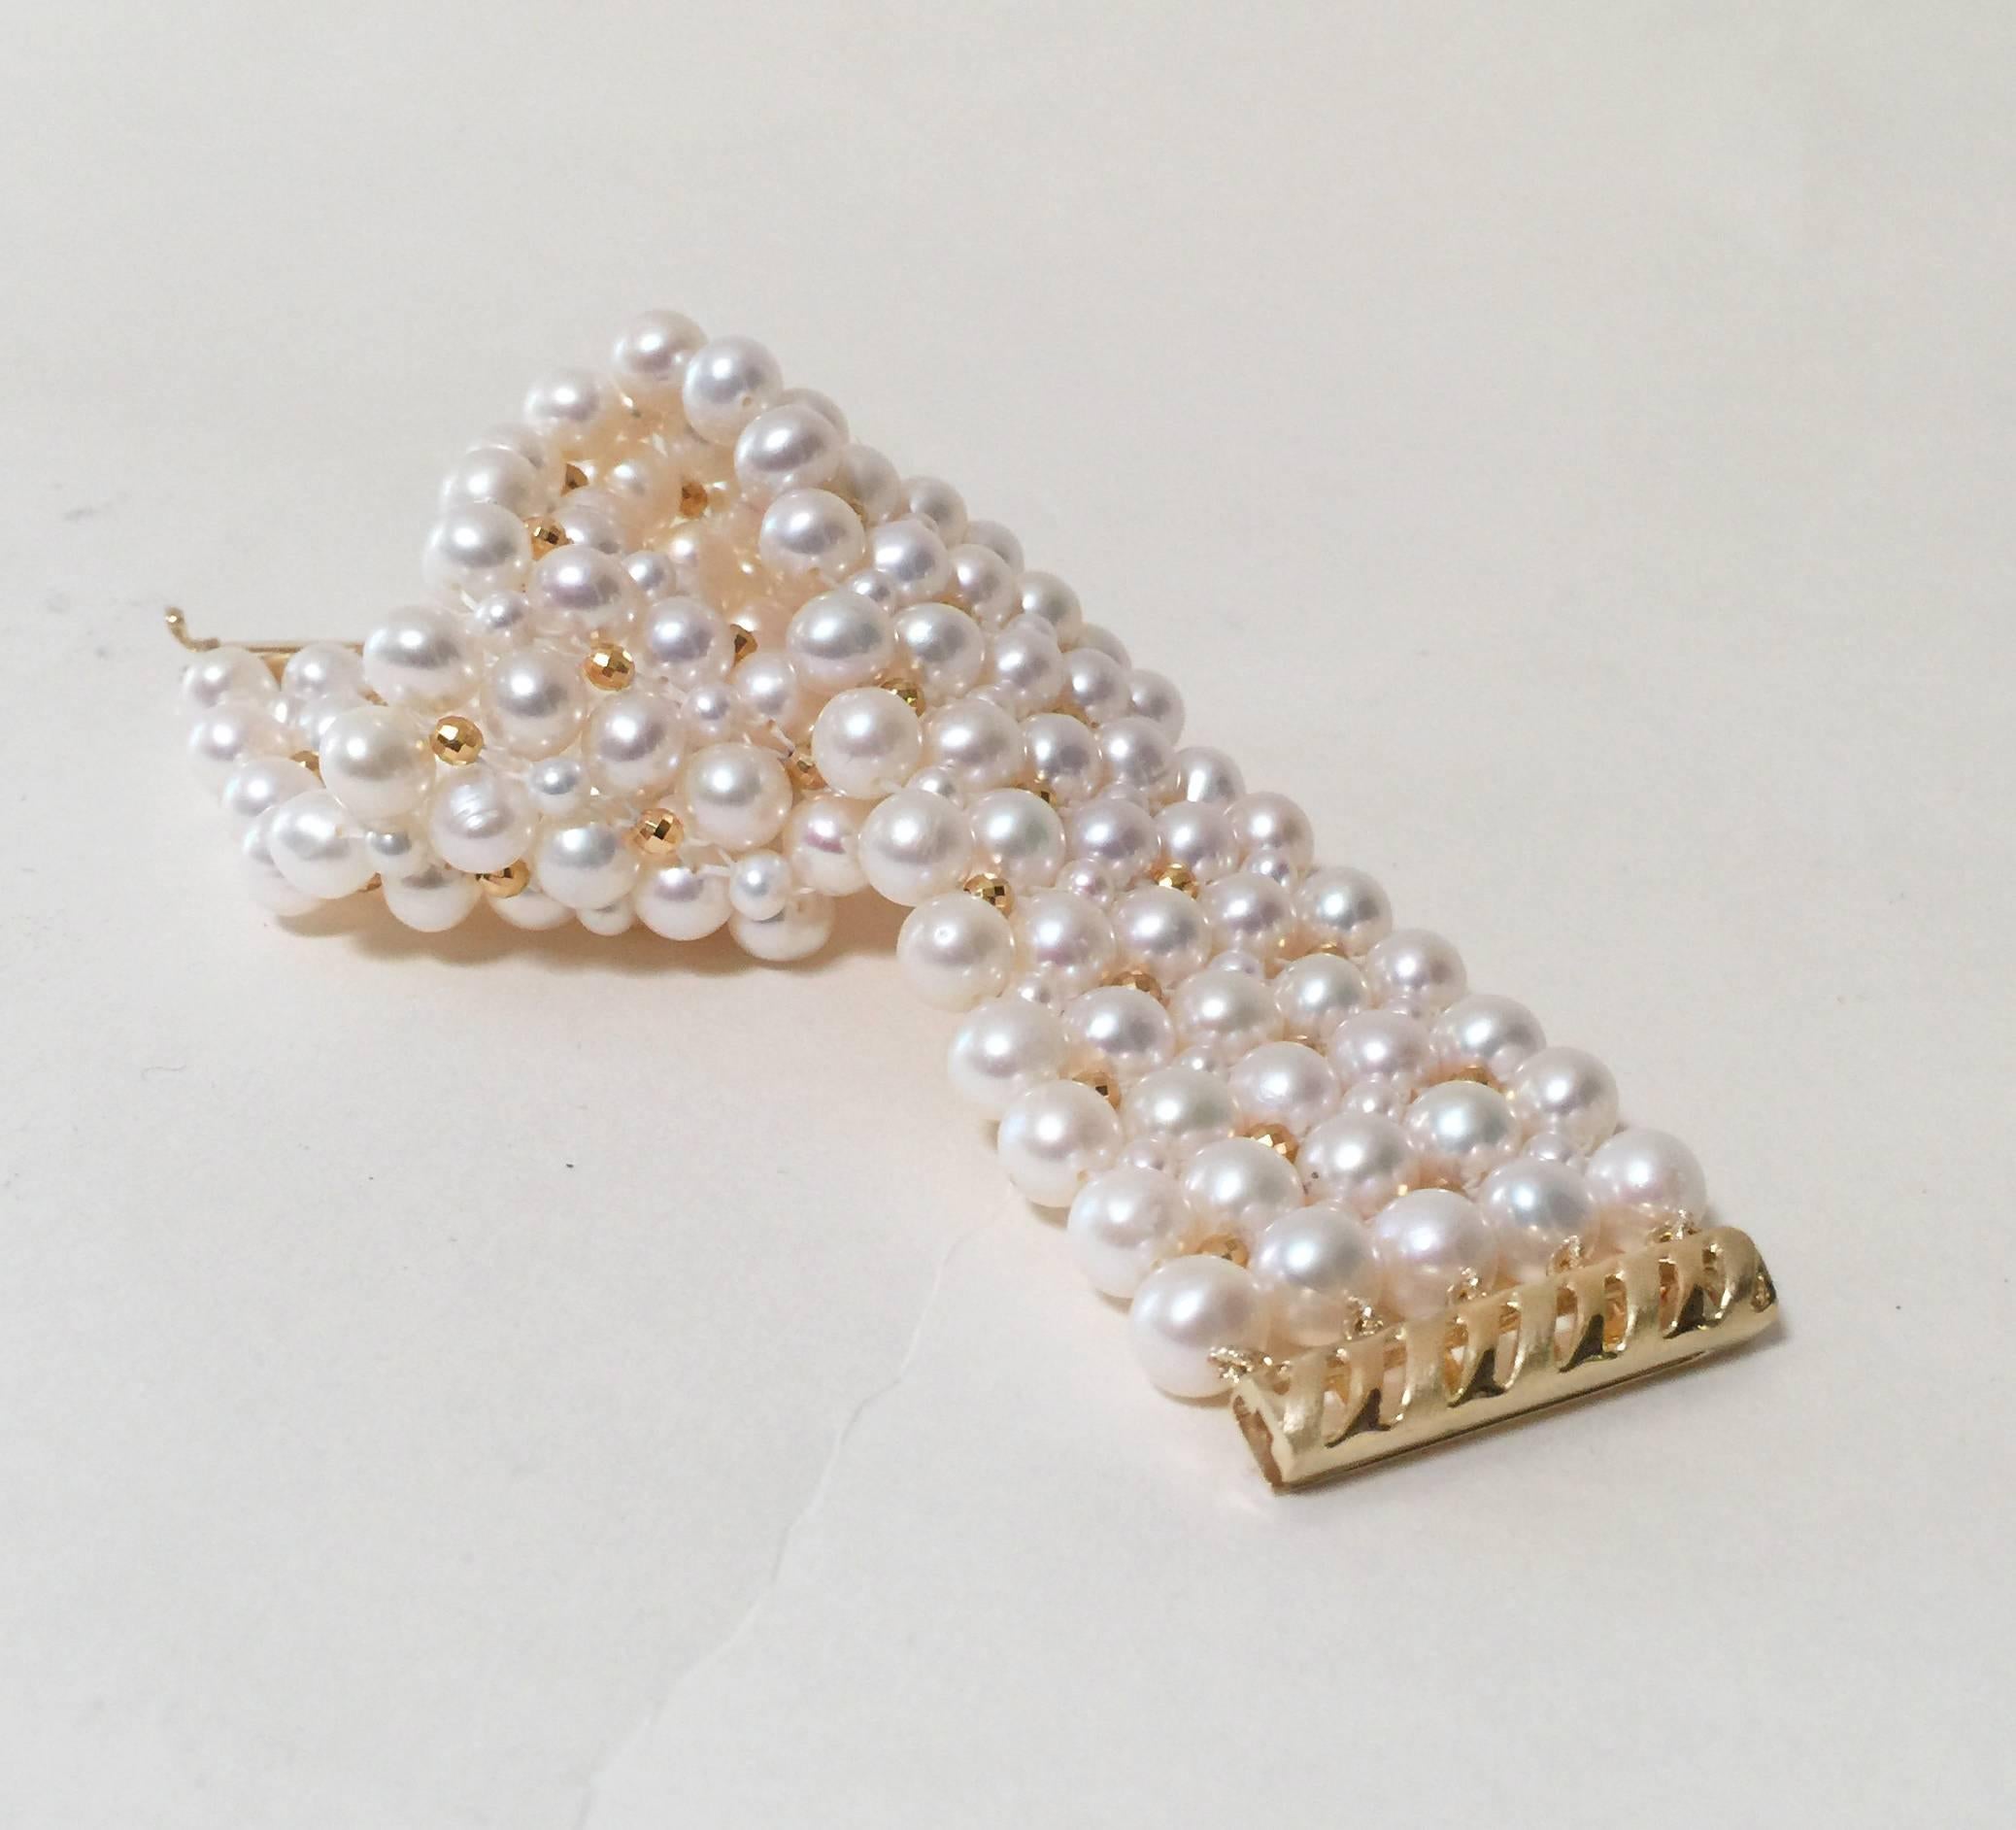 Artist Marina J. Woven Pearl Bracelet with Gold plated Sterling Silver Beads, Clasp 